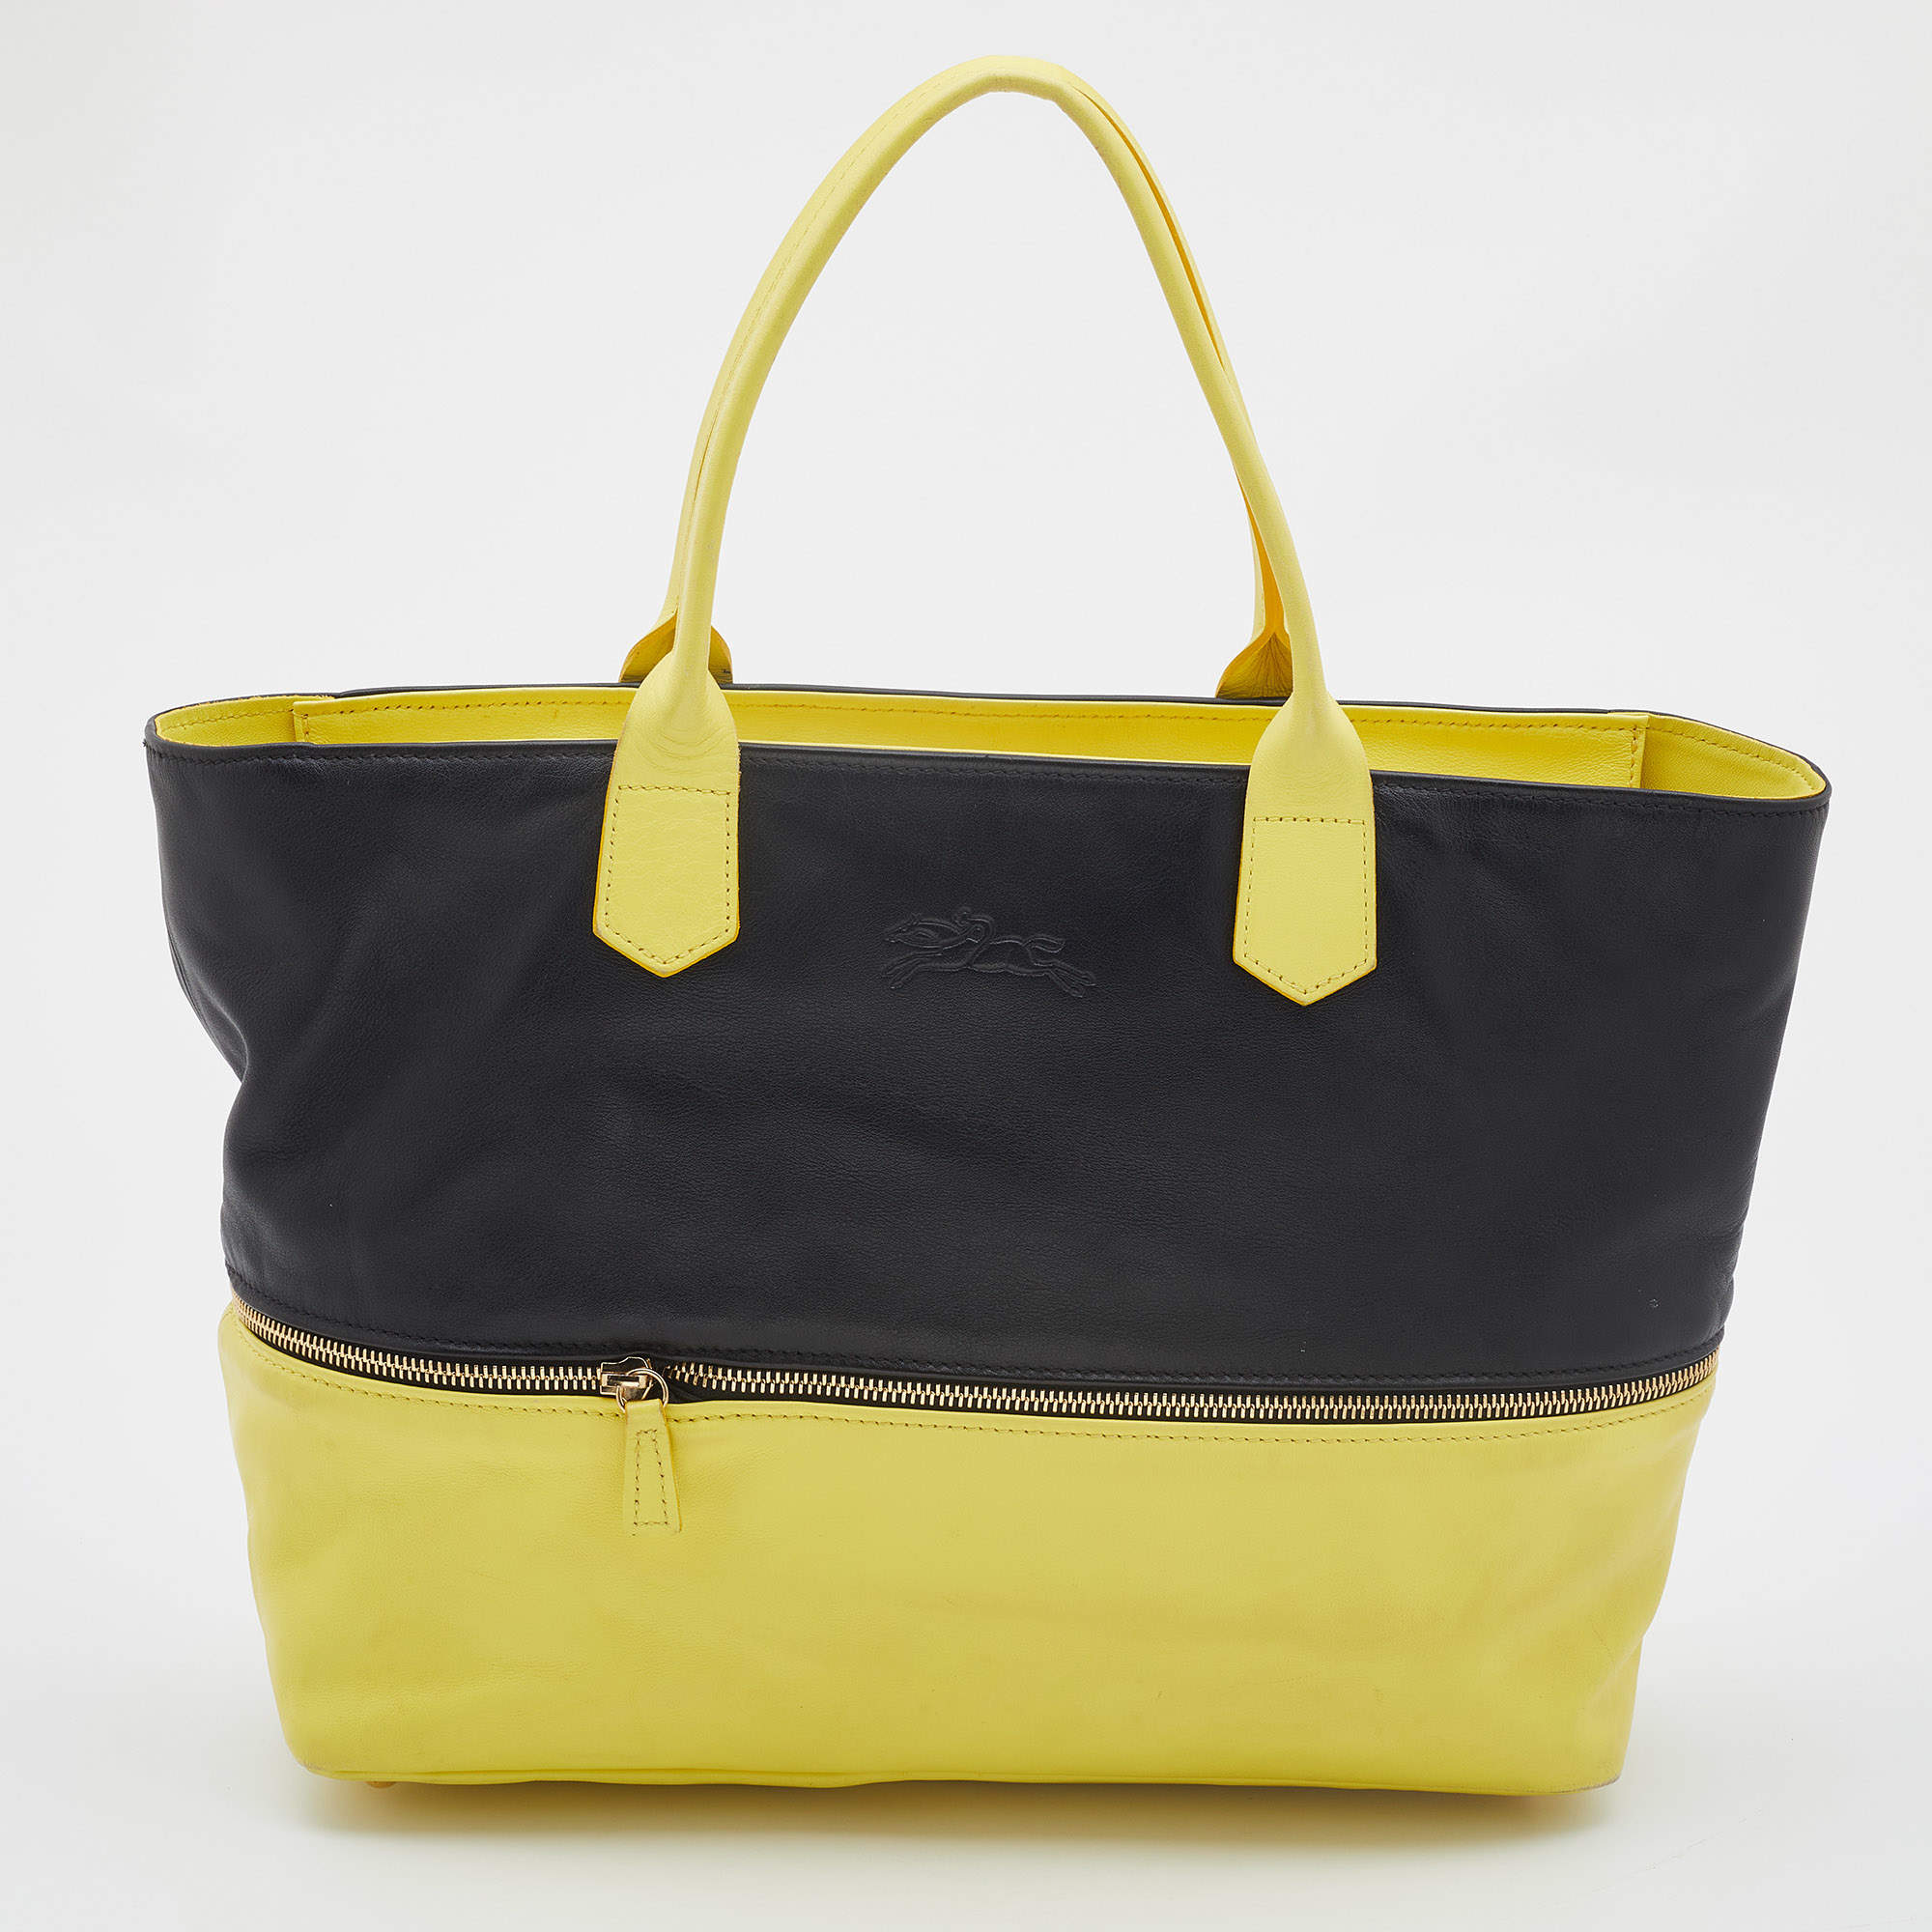 Longchamp BLE PLIAGE XTRA Pouch - Yellow Leather (Lemon) NEW with